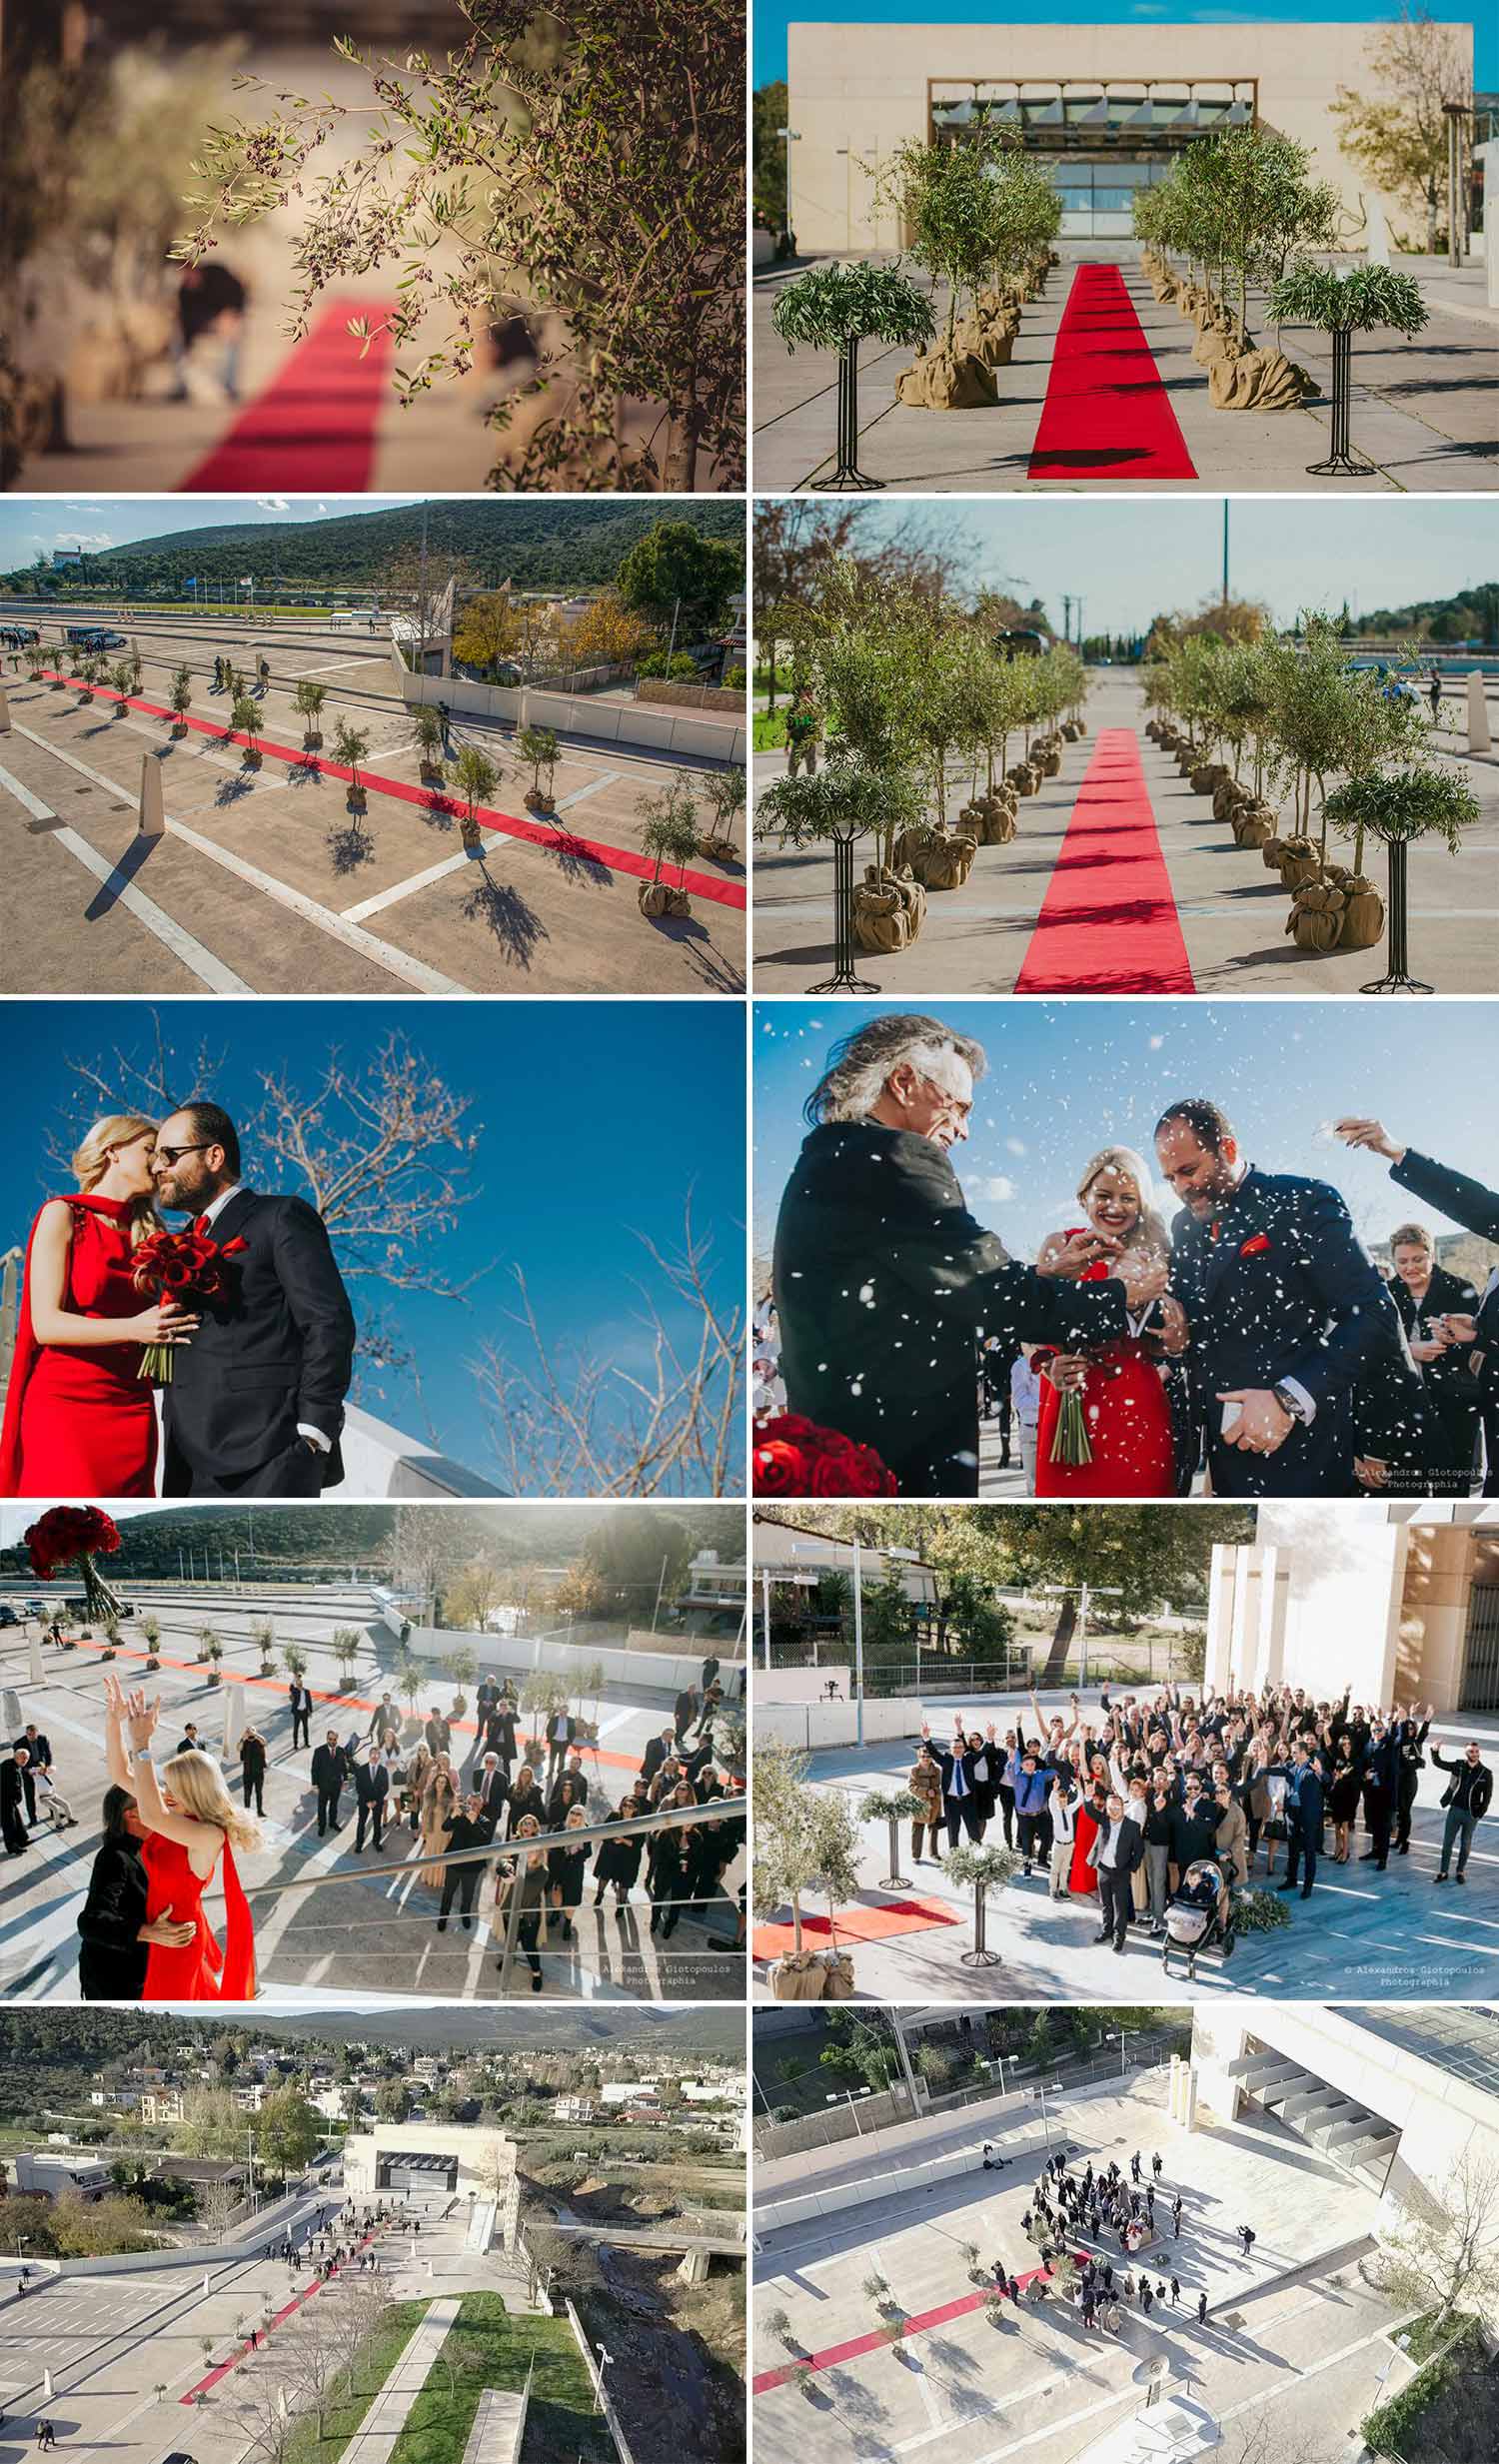 A luxurious wedding in shades of red took place on Christmas at the Marathοna’s hall